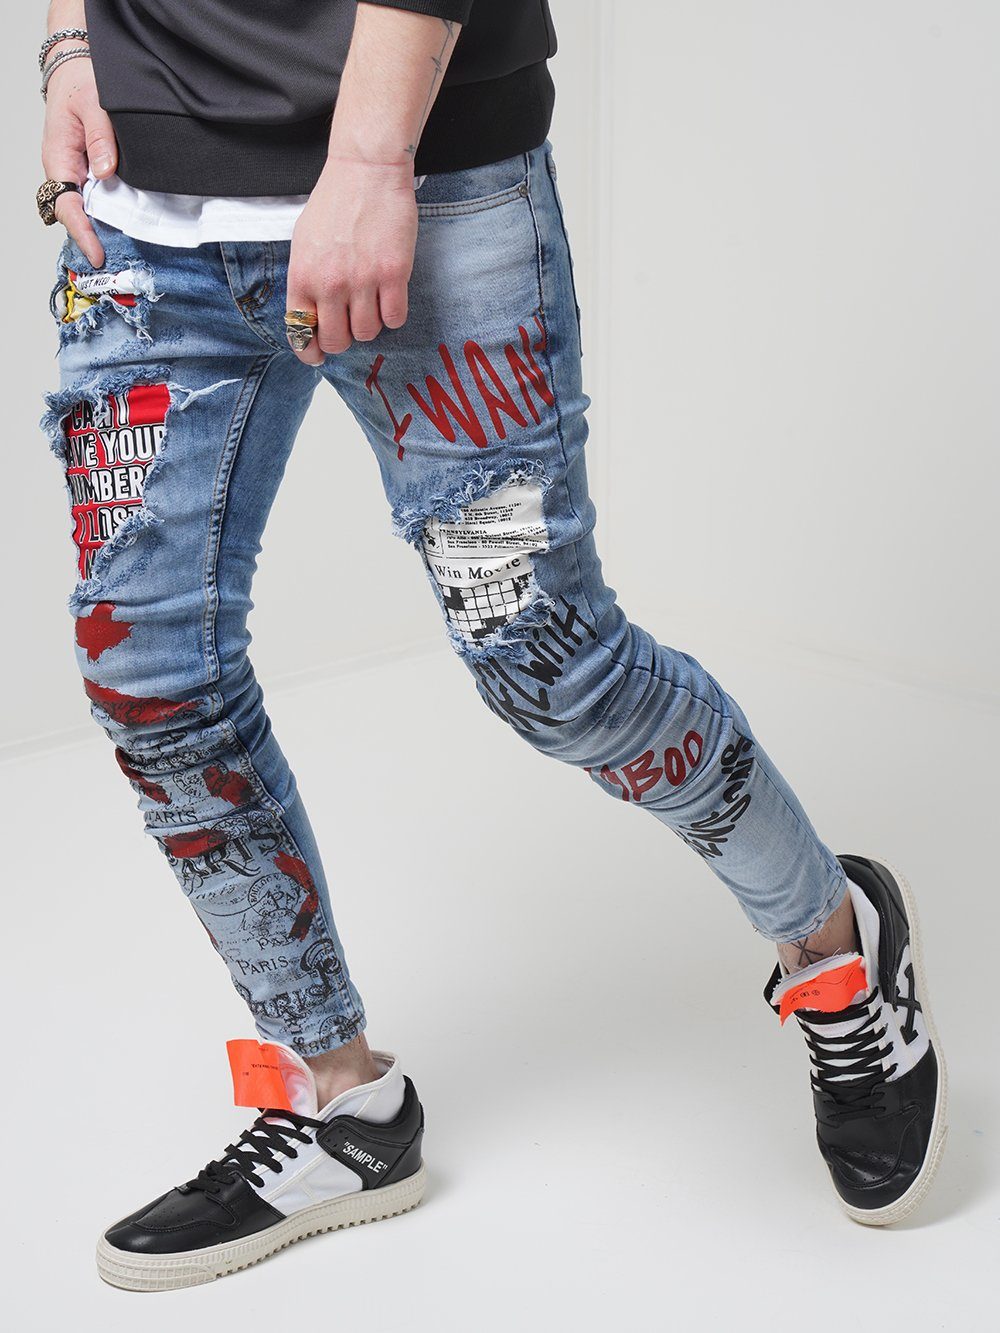 A man wearing a pair of BANKSY jeans with graffiti on them.